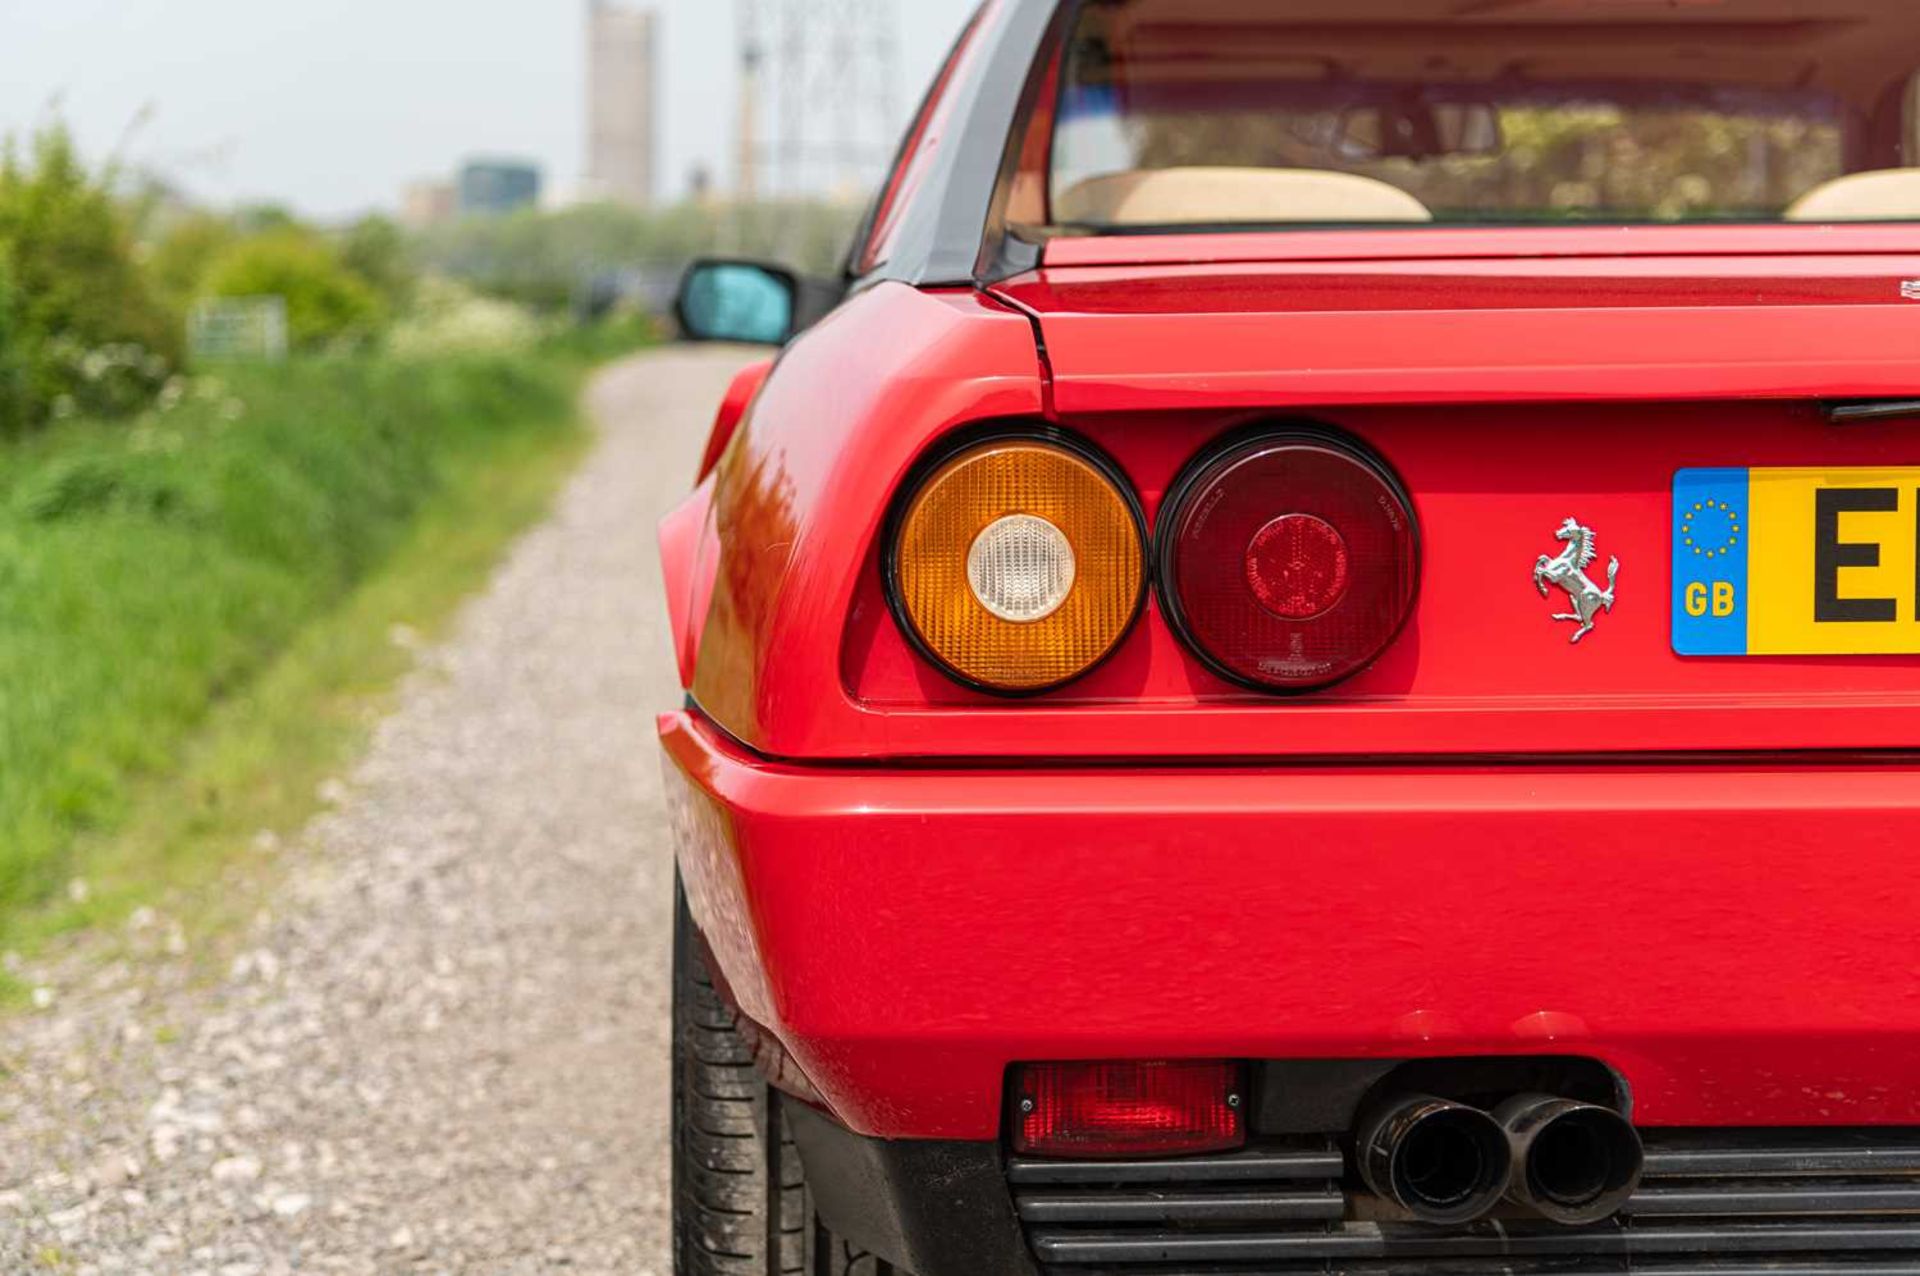 1988 Ferrari Mondial QV ***NO RESERVE*** Remained in the same ownership for nearly two decades finis - Image 25 of 91